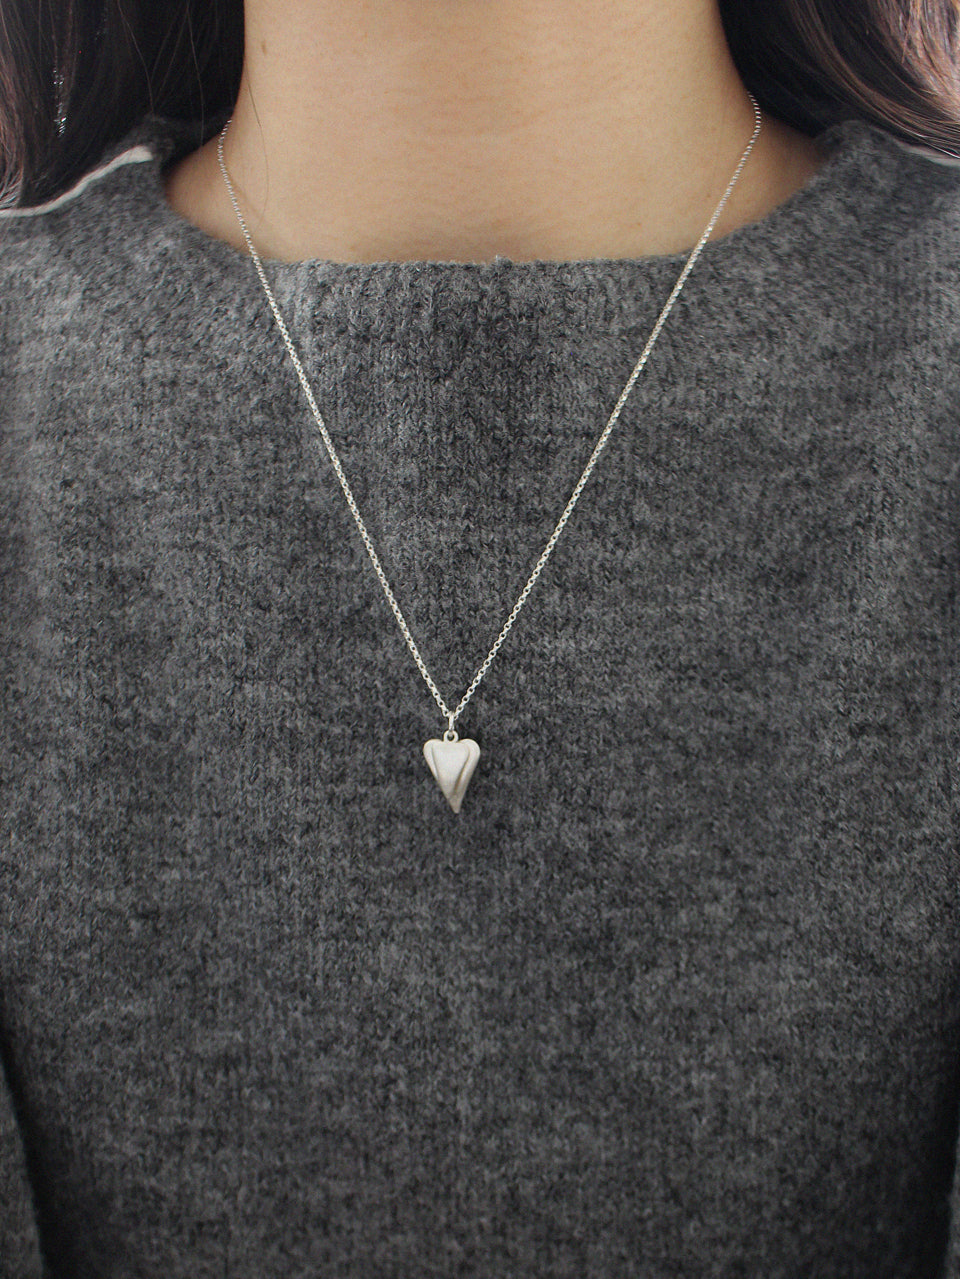 【MADE】 double heart necklace (50cm)